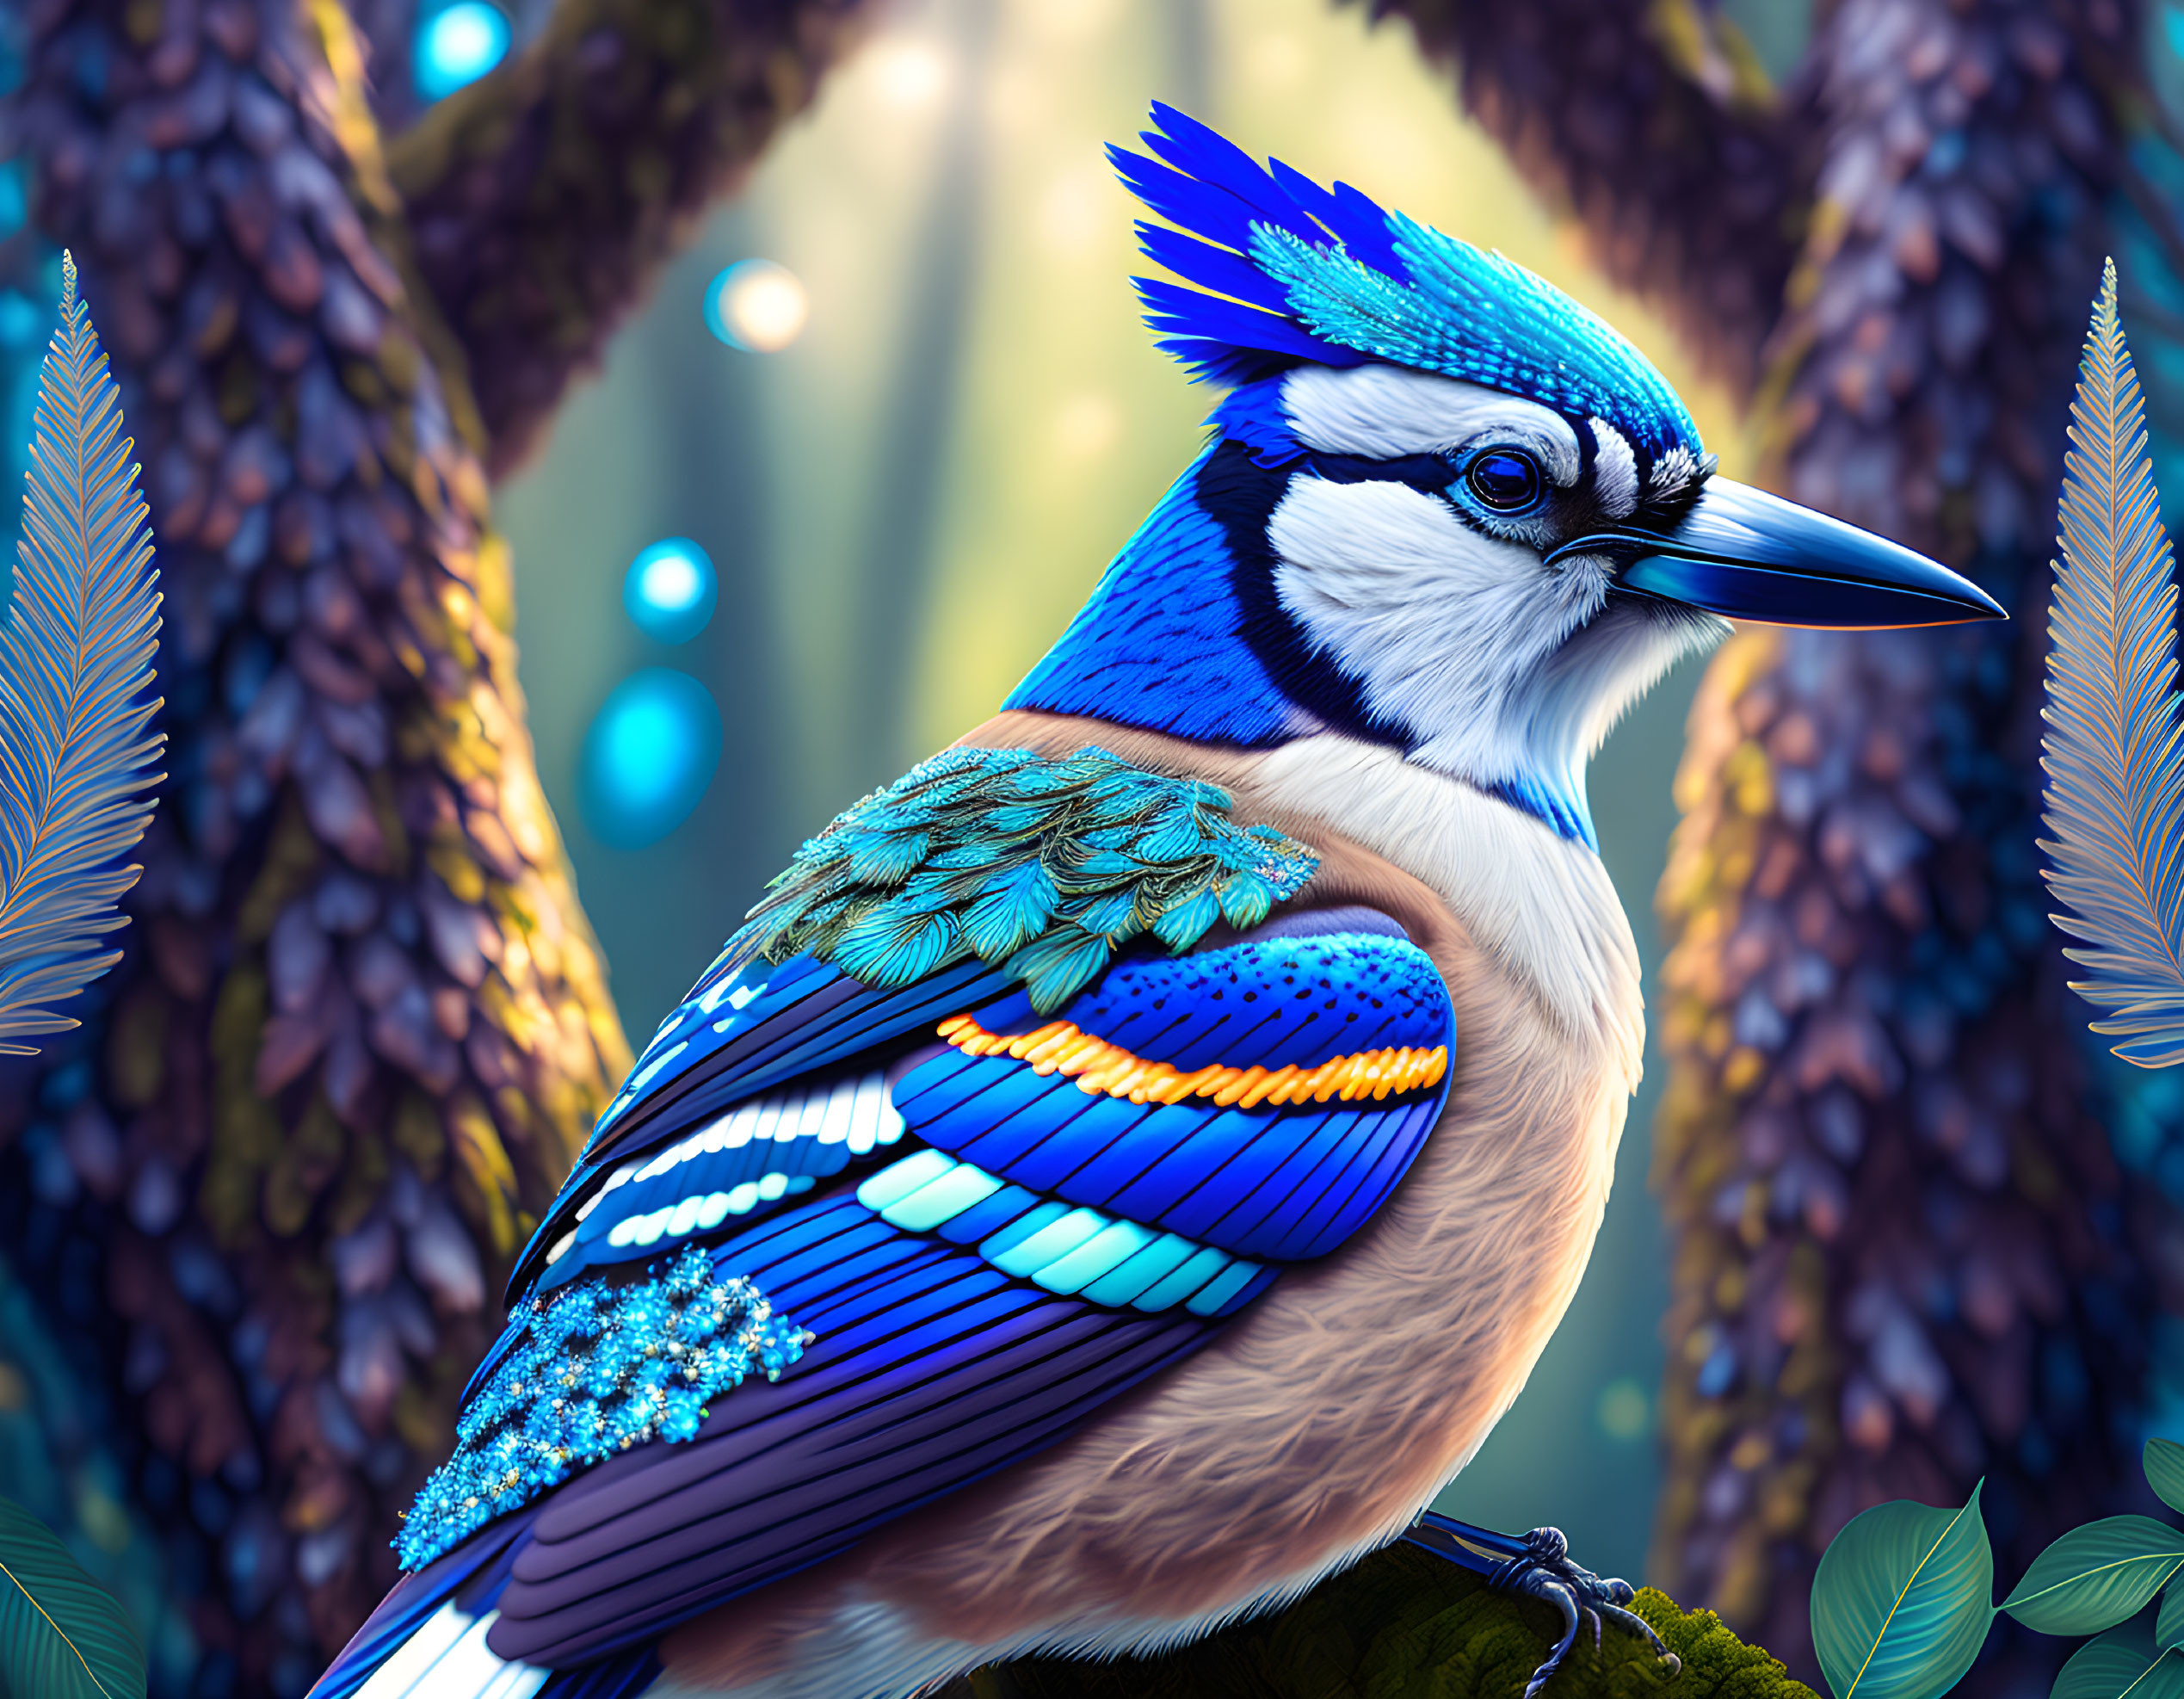 Colorful Bird with Blue and Orange Plumage in Forest Setting with Sunbeams